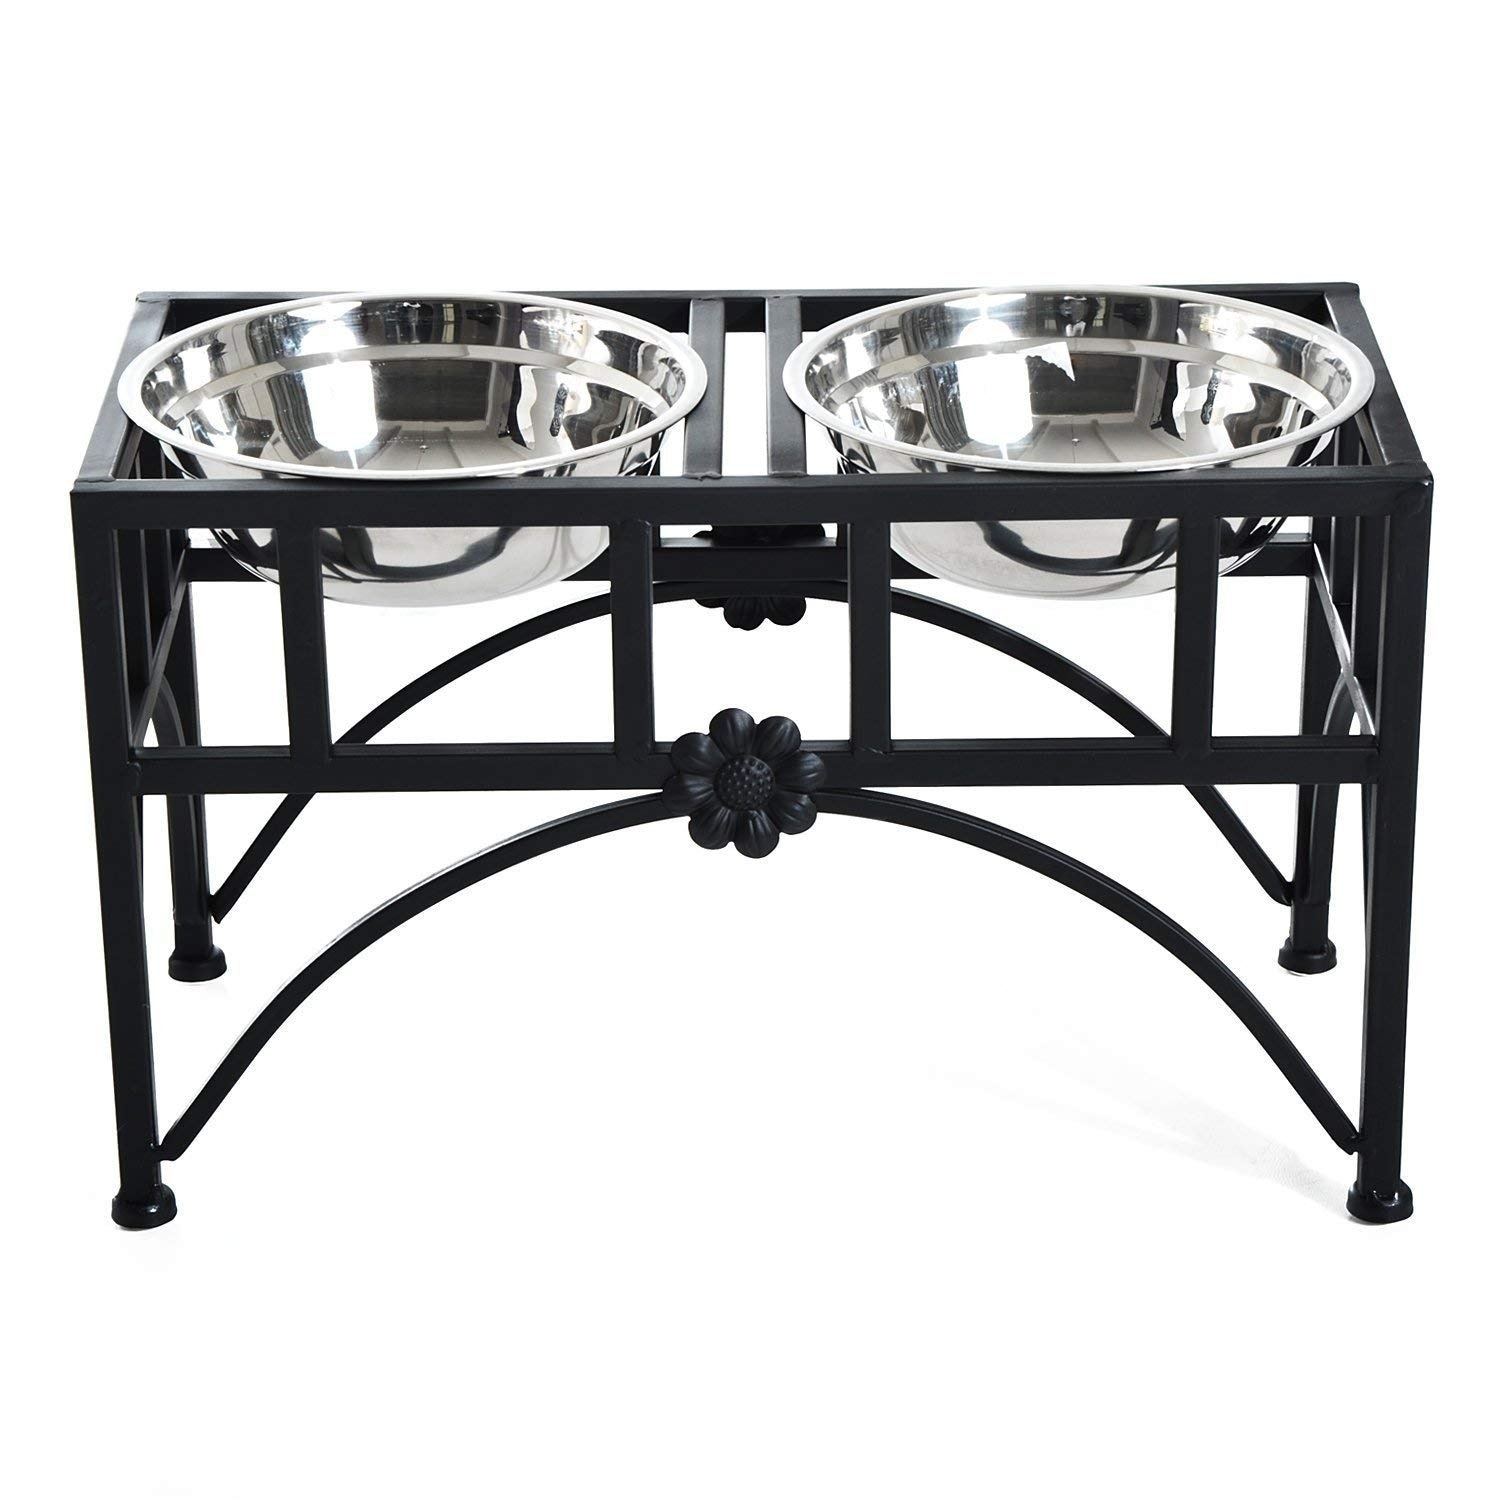 https://ak1.ostkcdn.com/images/products/22408080/PawHut-17-Double-Stainless-Steel-Heavy-Duty-Dog-Food-Bowl-Pet-Elevated-Feeding-Station-2d8355ba-975d-424f-905b-f86cd6afced1.jpg